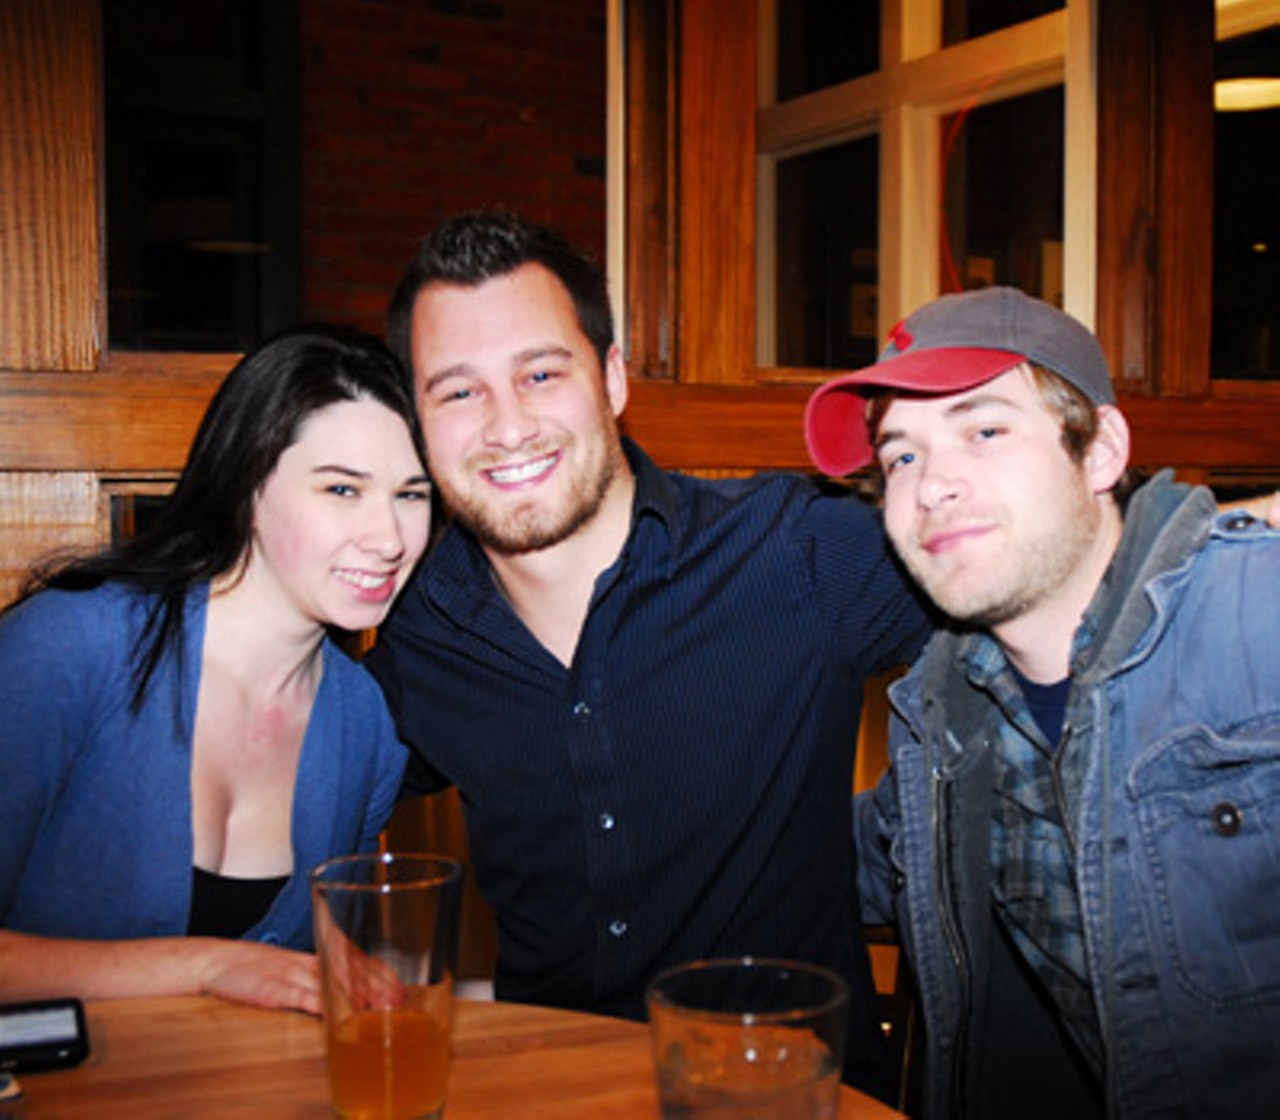 Autumn Sij, Jordan Strasen and Andy Beard on January 2 at the Schlafly Tap Room.